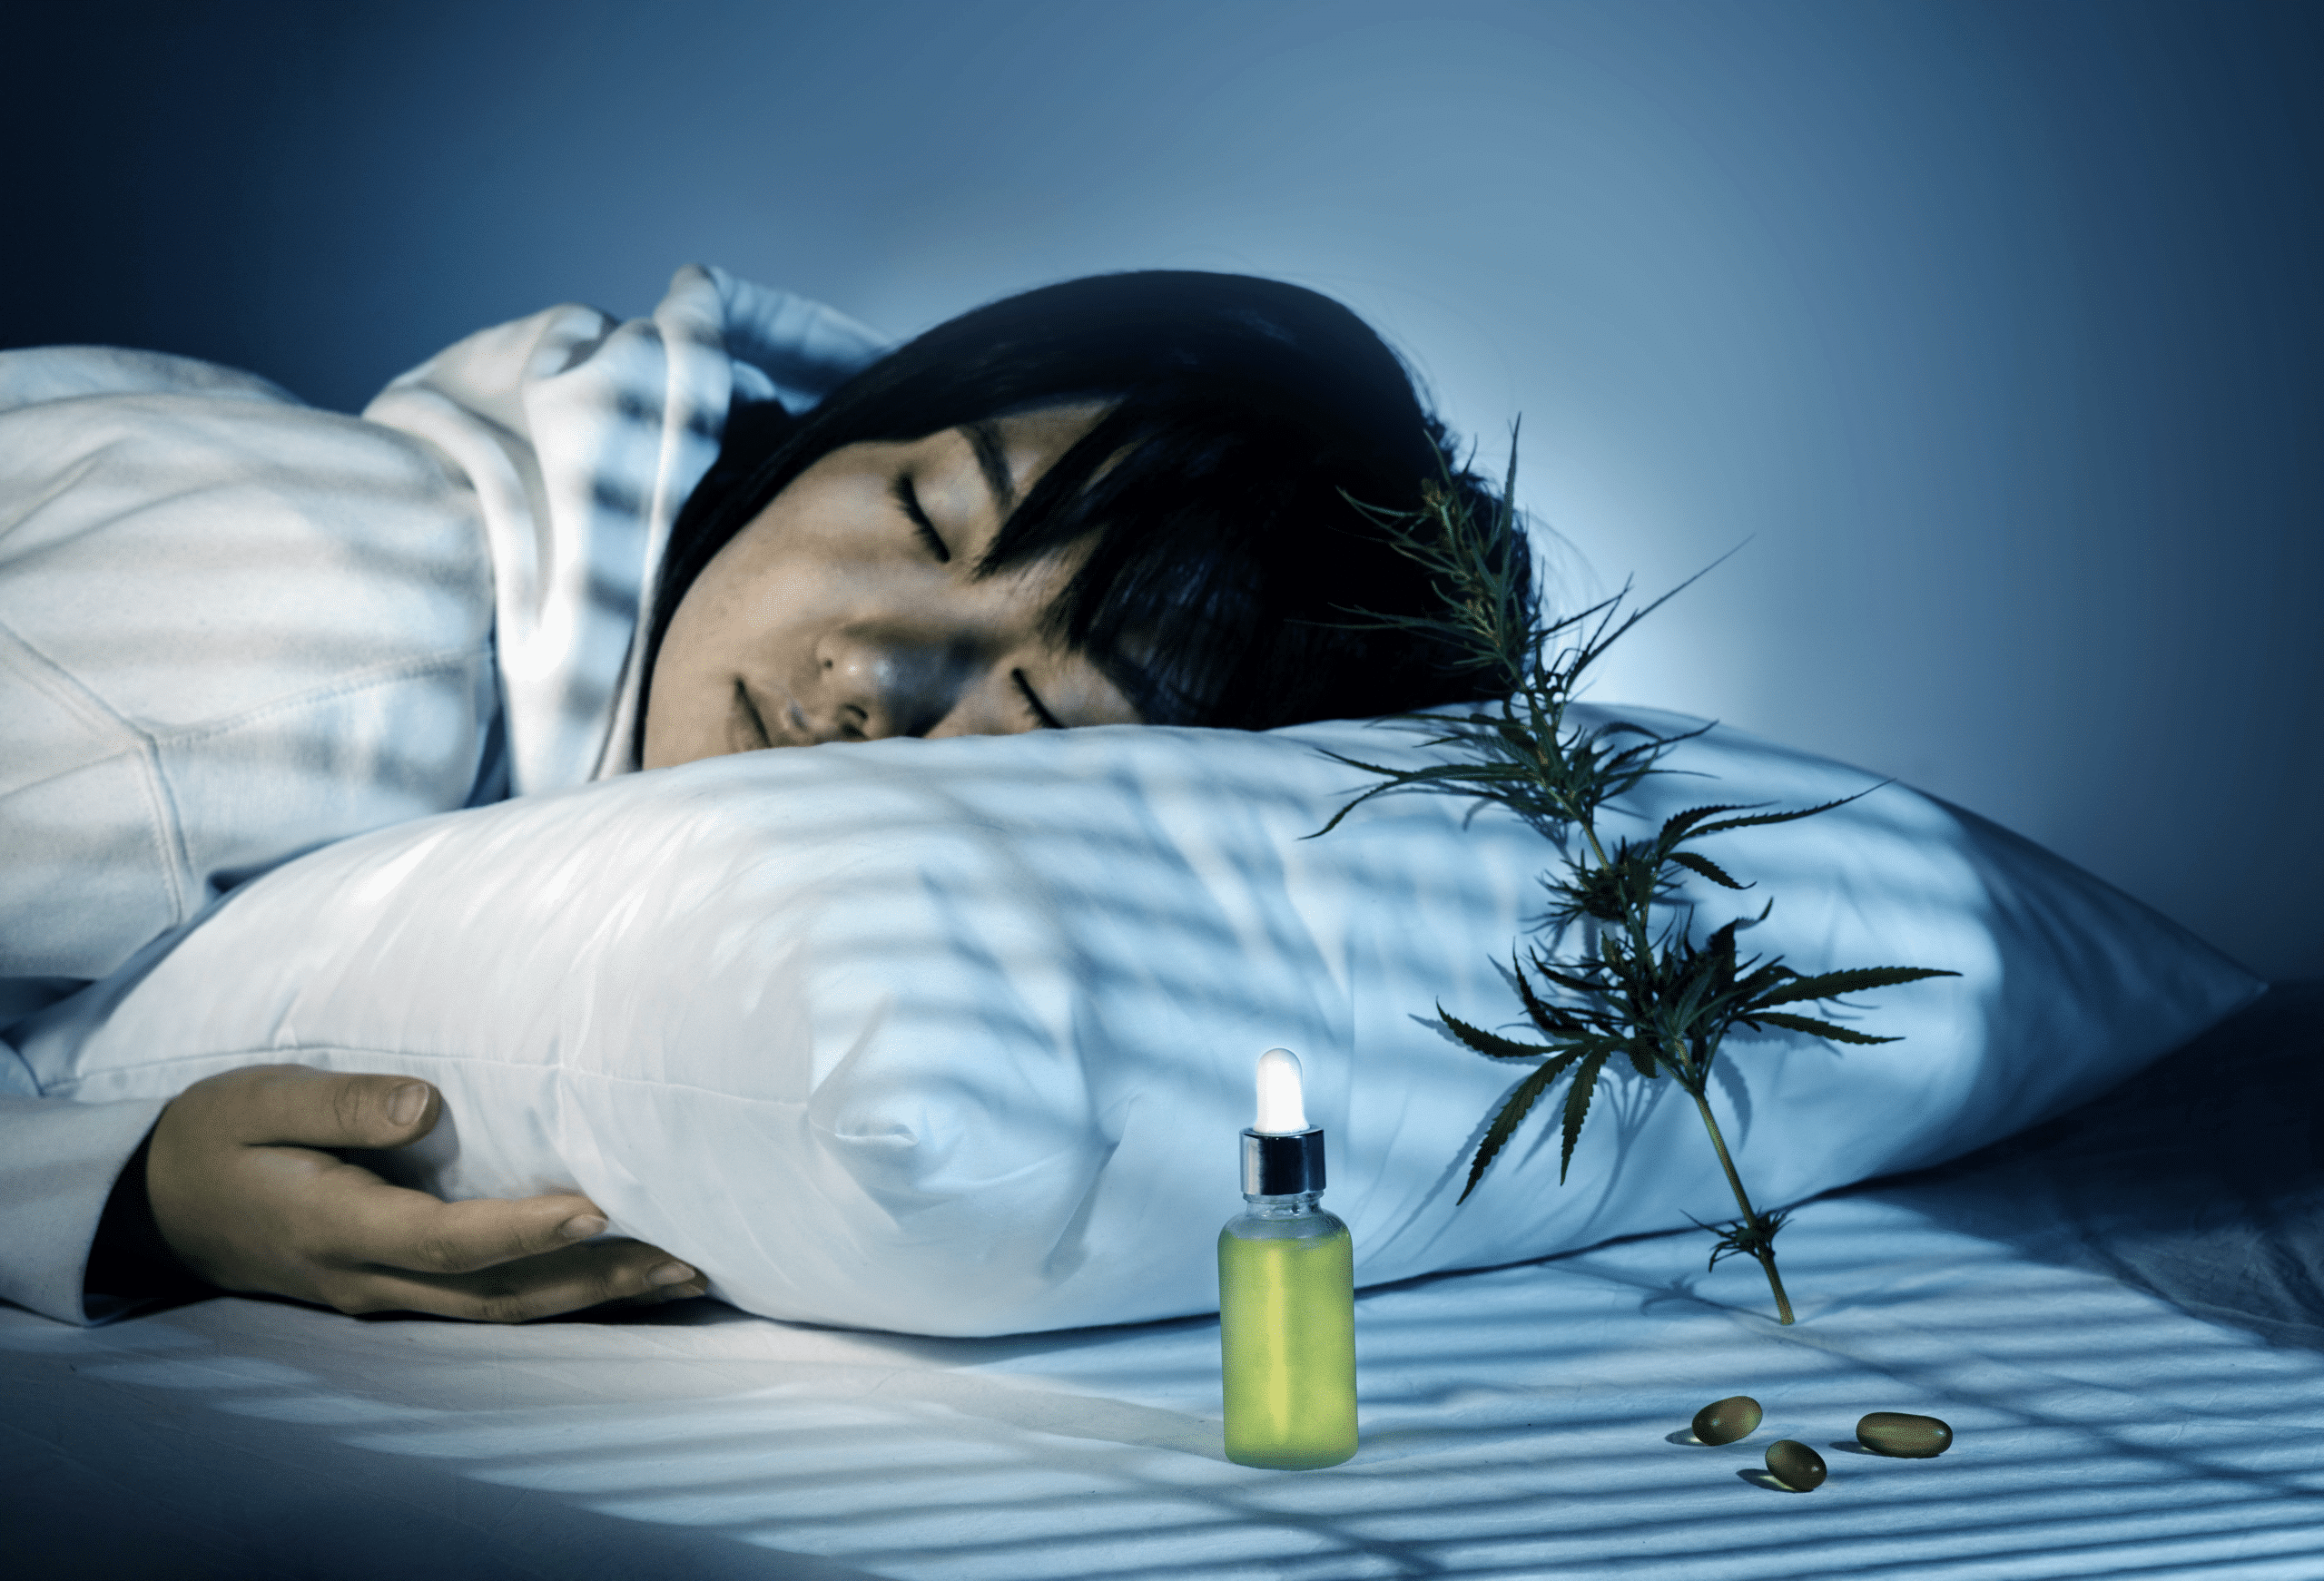 3. TREATING INSOMNIA WITH MEDICAL CANNABIS